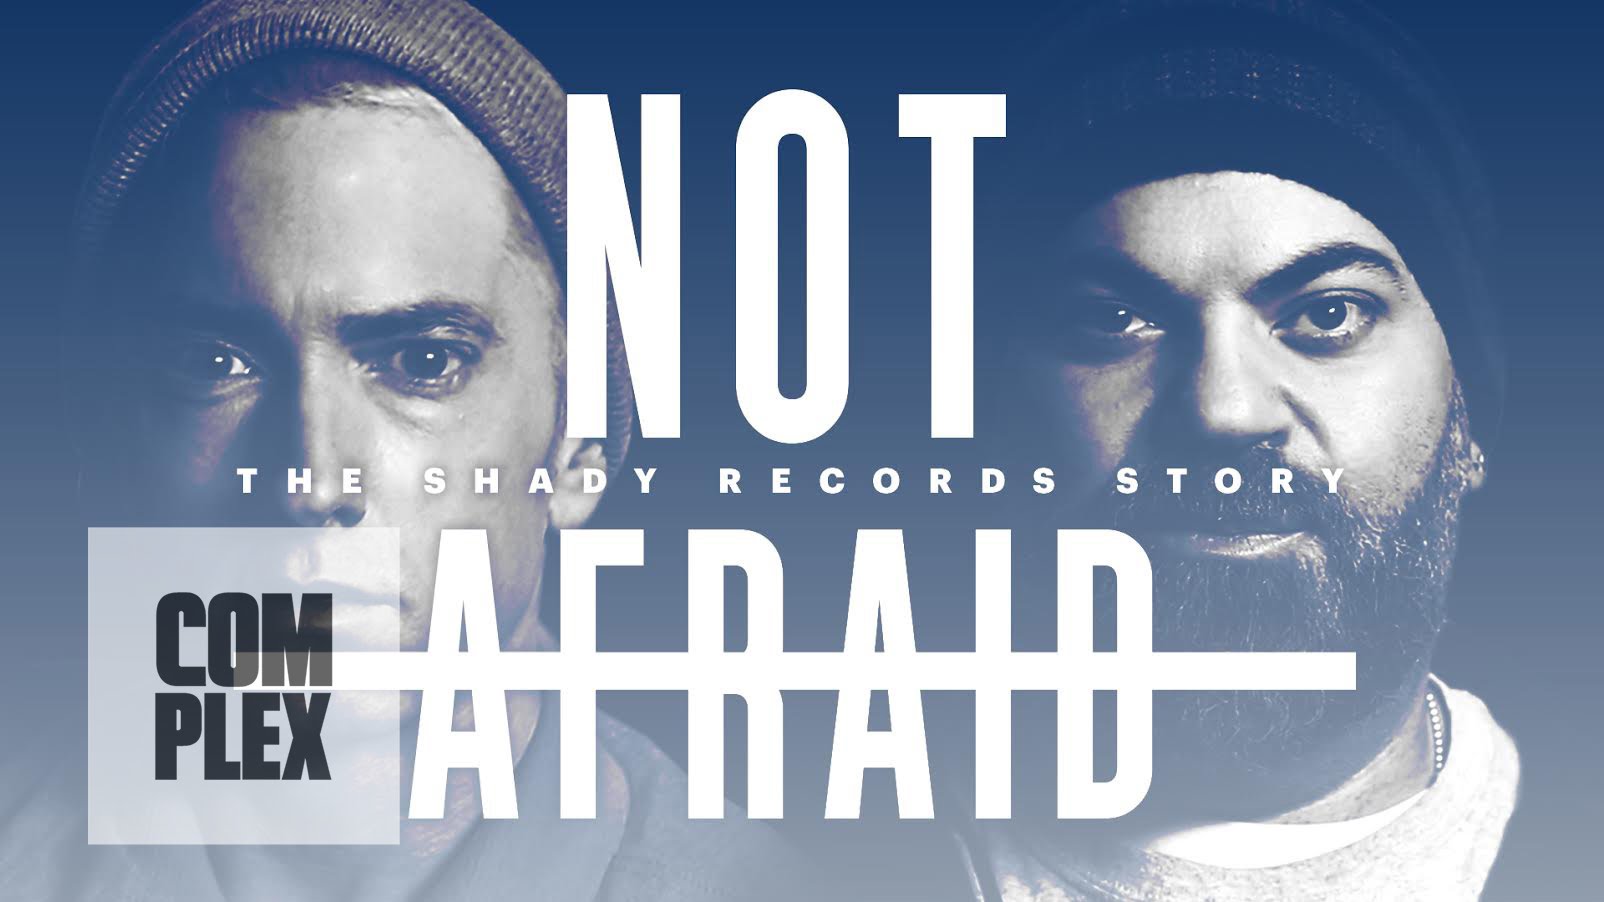 Not Afraid : The Shady Records Story Outtakes (Video)